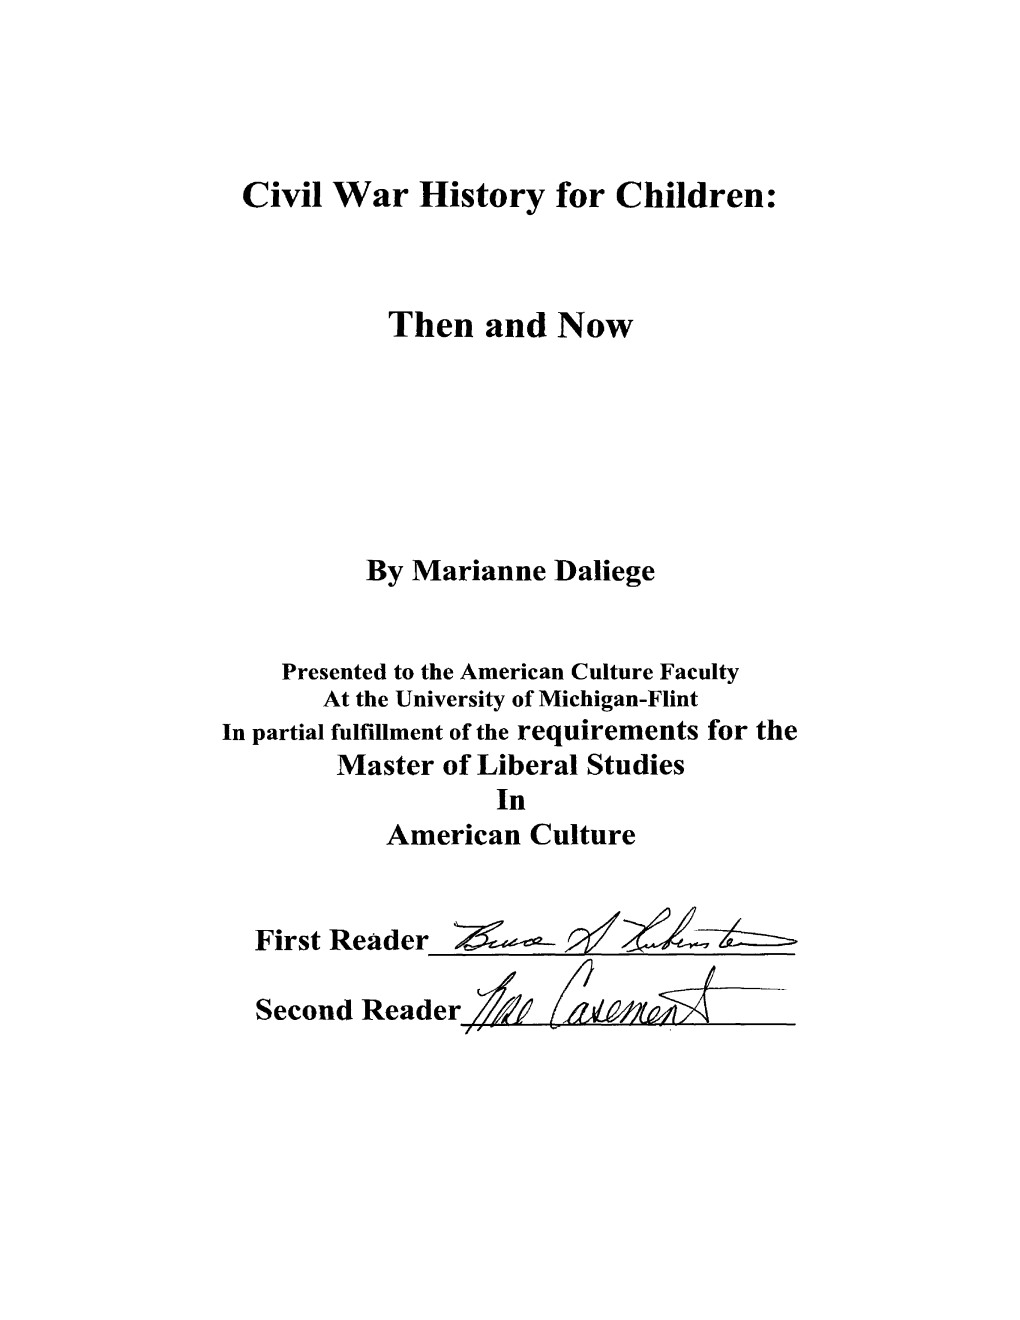 Civil War History for Children Then And